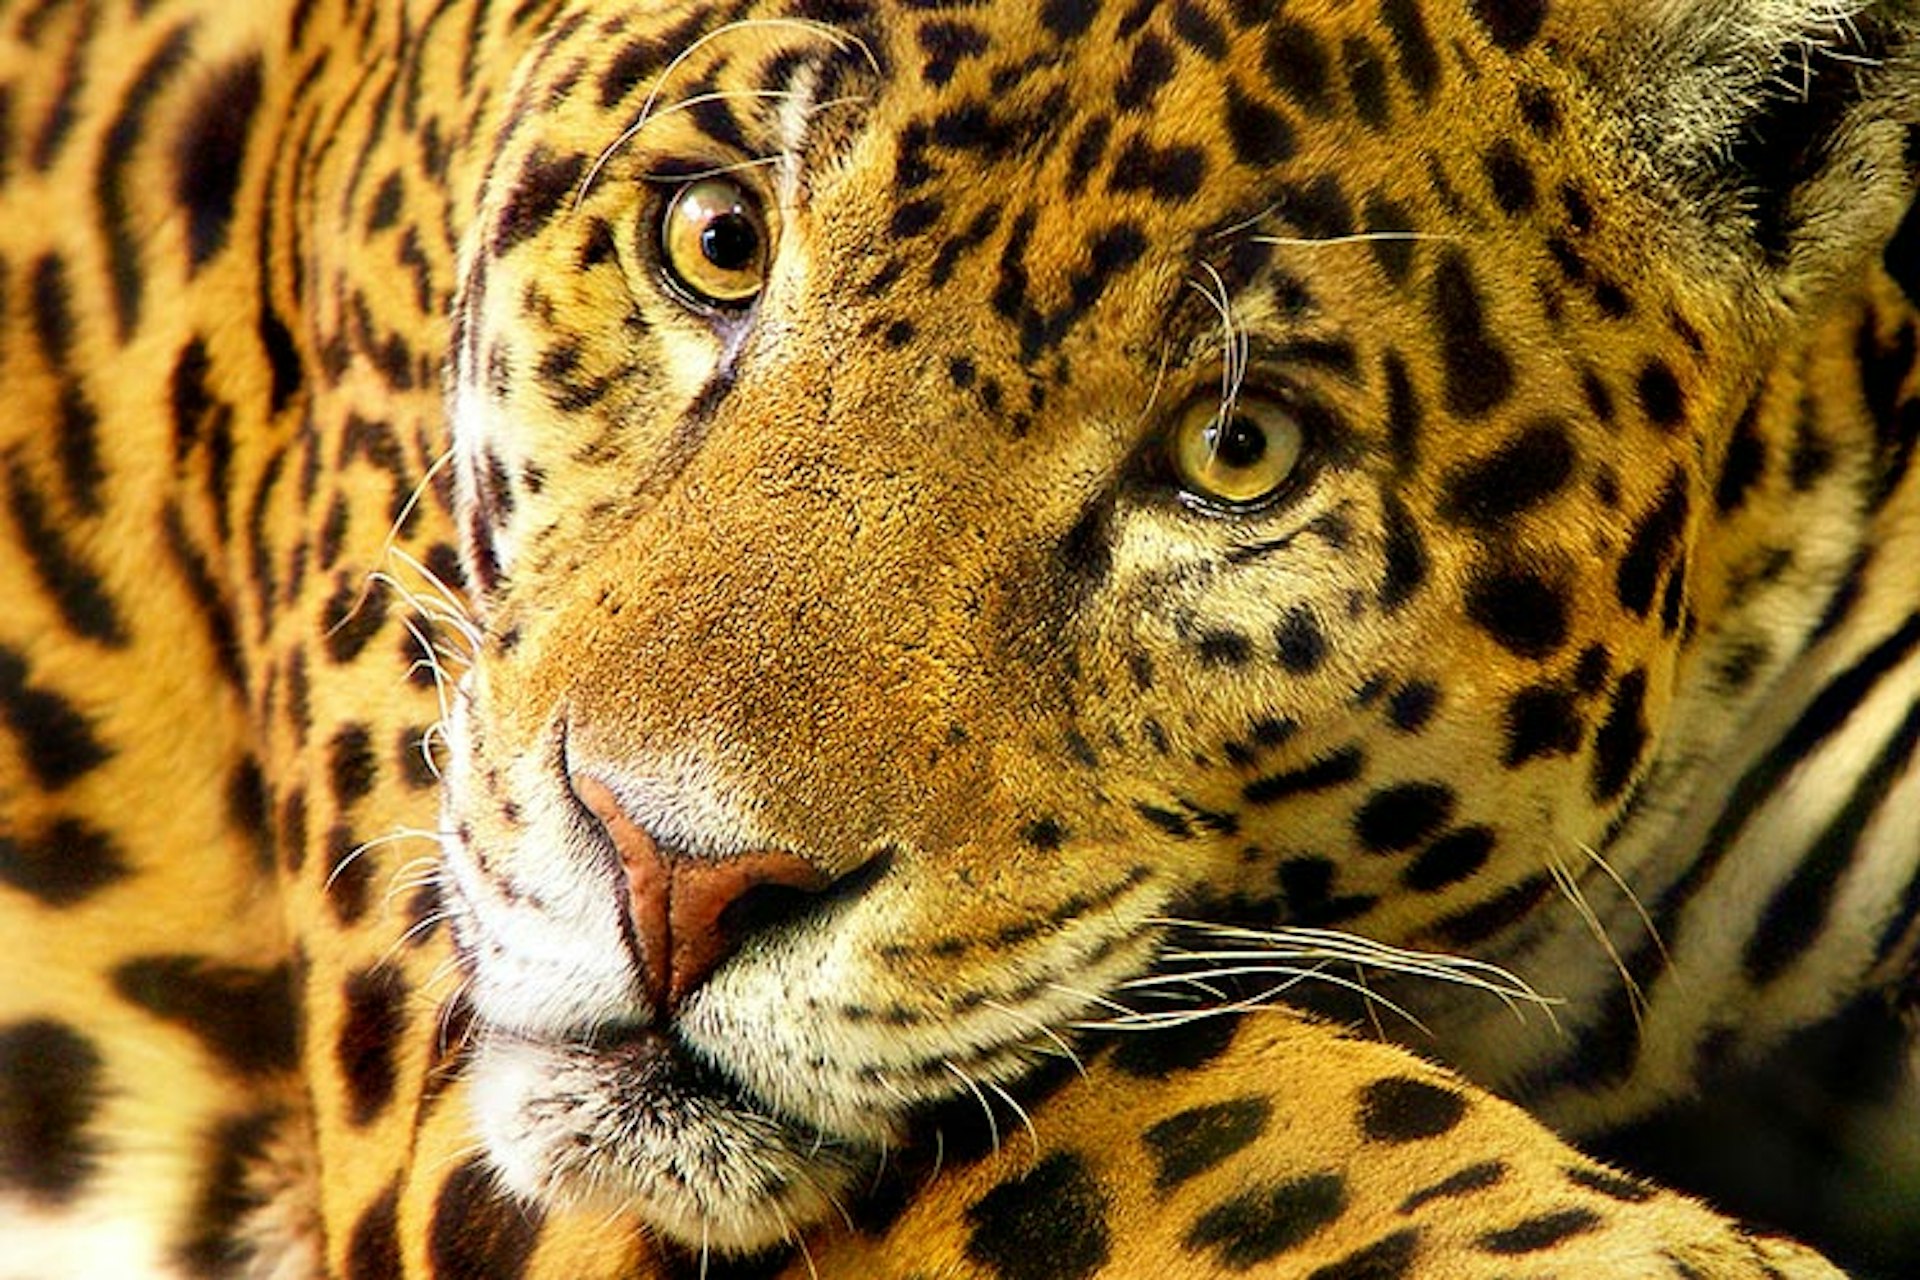 The jaguar is the most mysterious of all the big cats. Image by Tambako the Jaguar / Moment Open / Getty Images